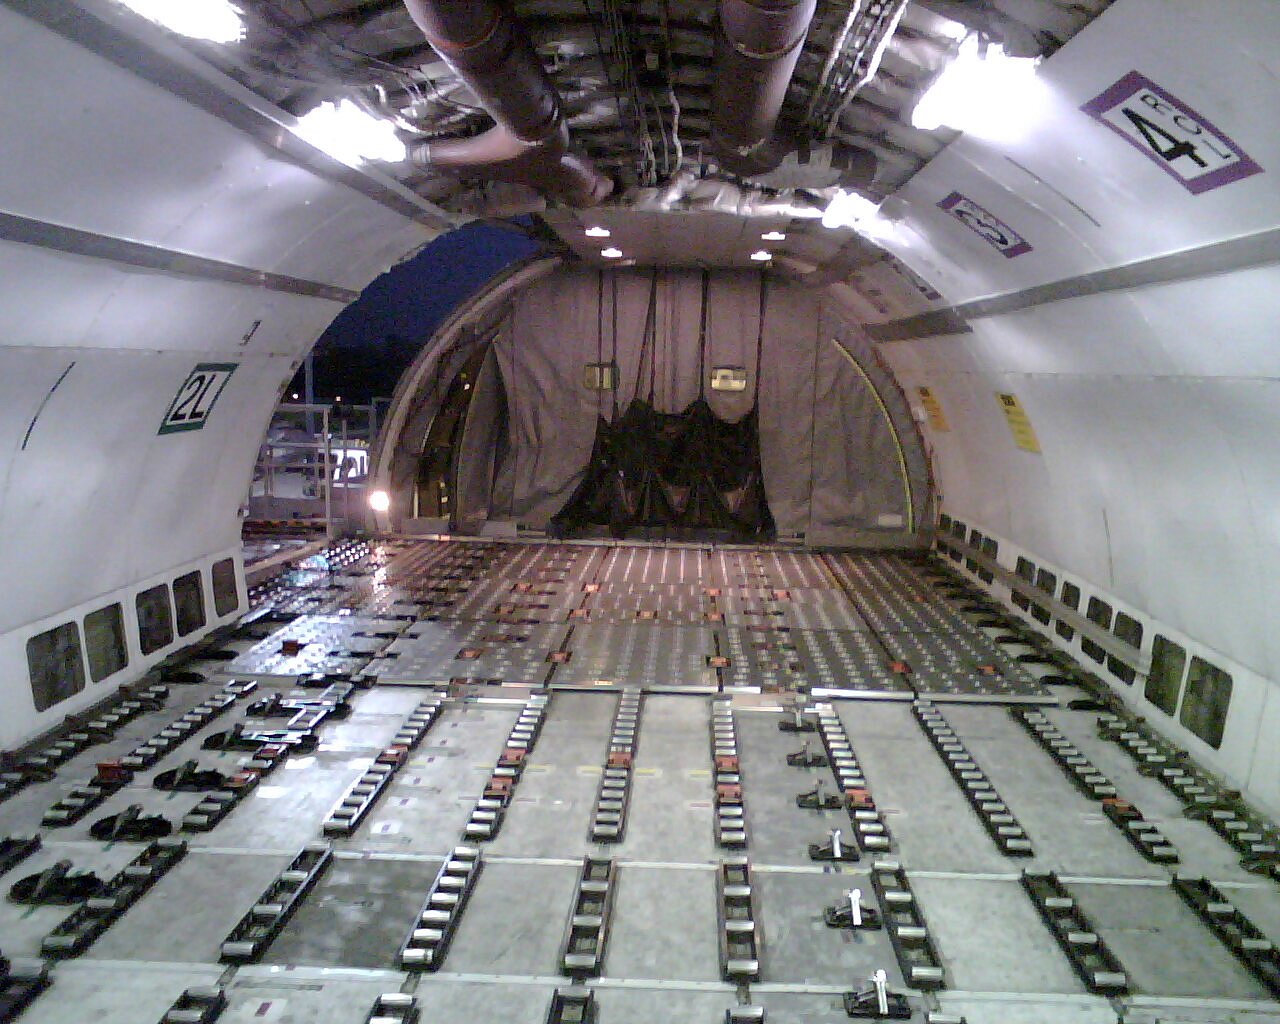 AIRBUS 1998 AIRBUS A300B4-622R CARGO CONFIGURATION FOR SALE